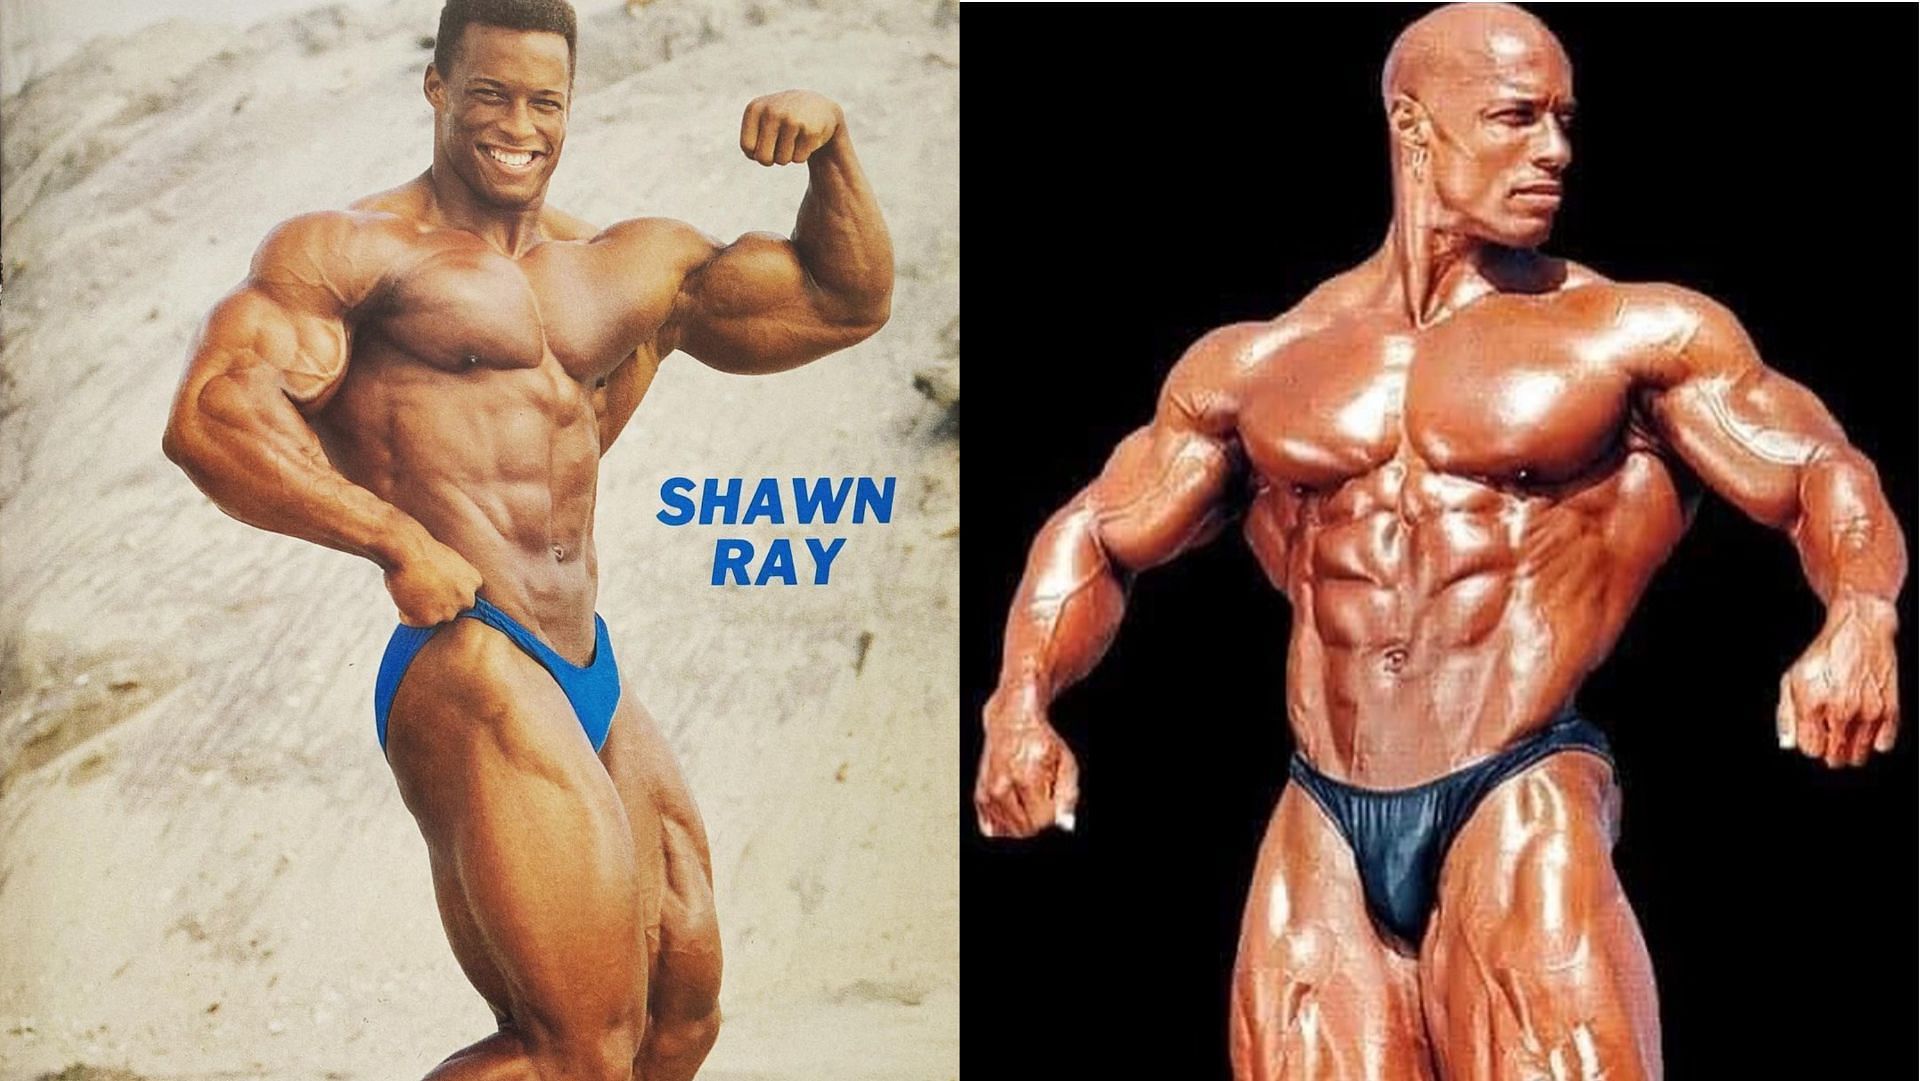 Shawn Ray was a professional bodybuilder who is now an entrepreneur, author and fitness icon (Image via Instagram) and 